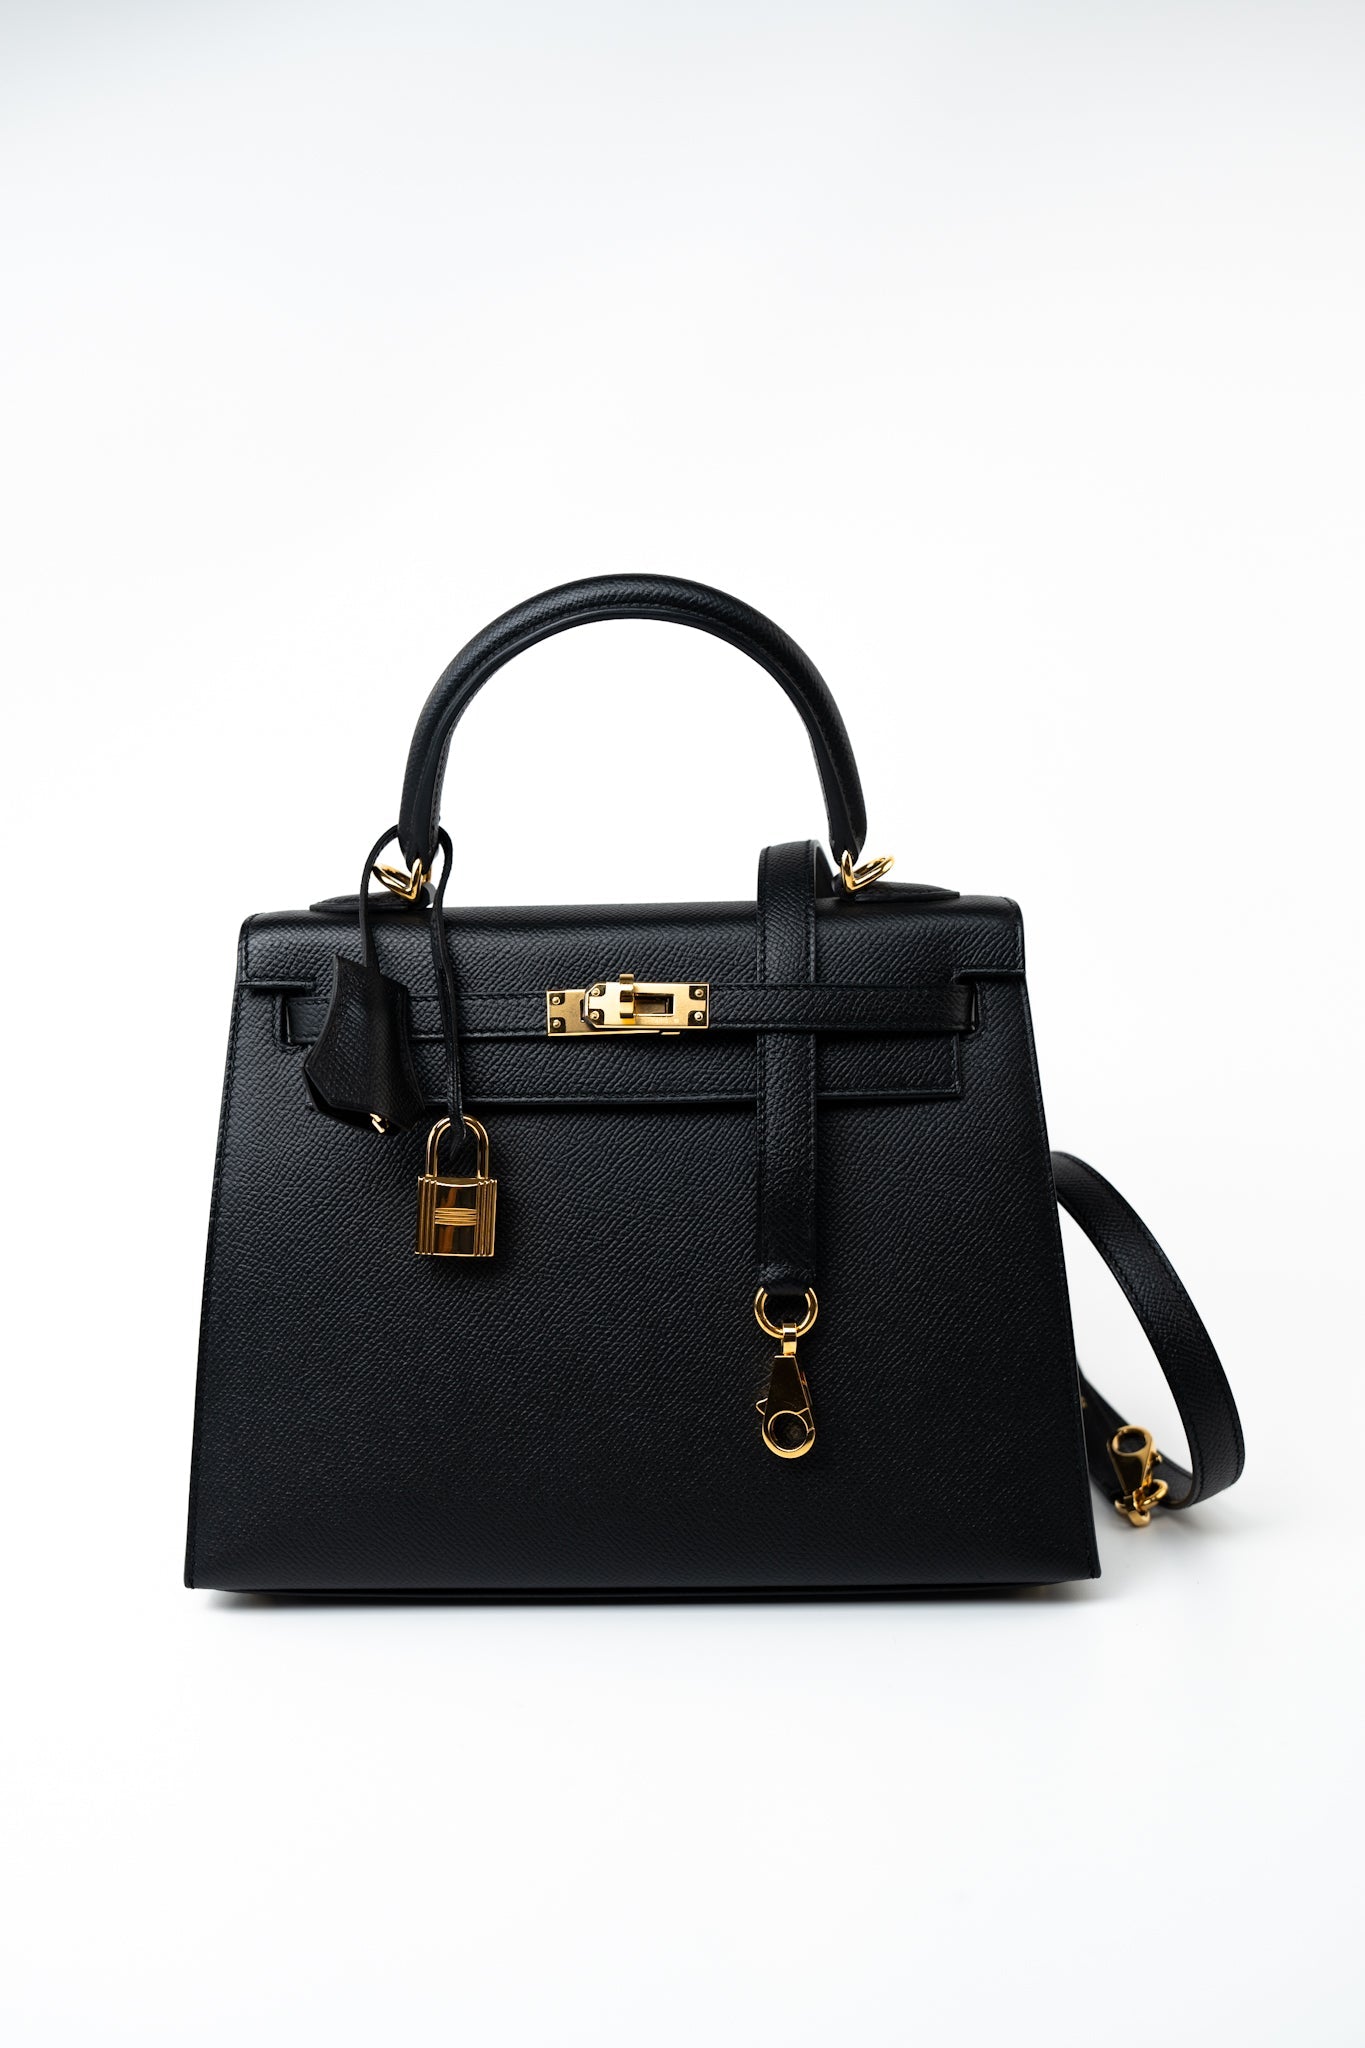 Introducing the Hermes Kelly 25 Veau Epsom Leather